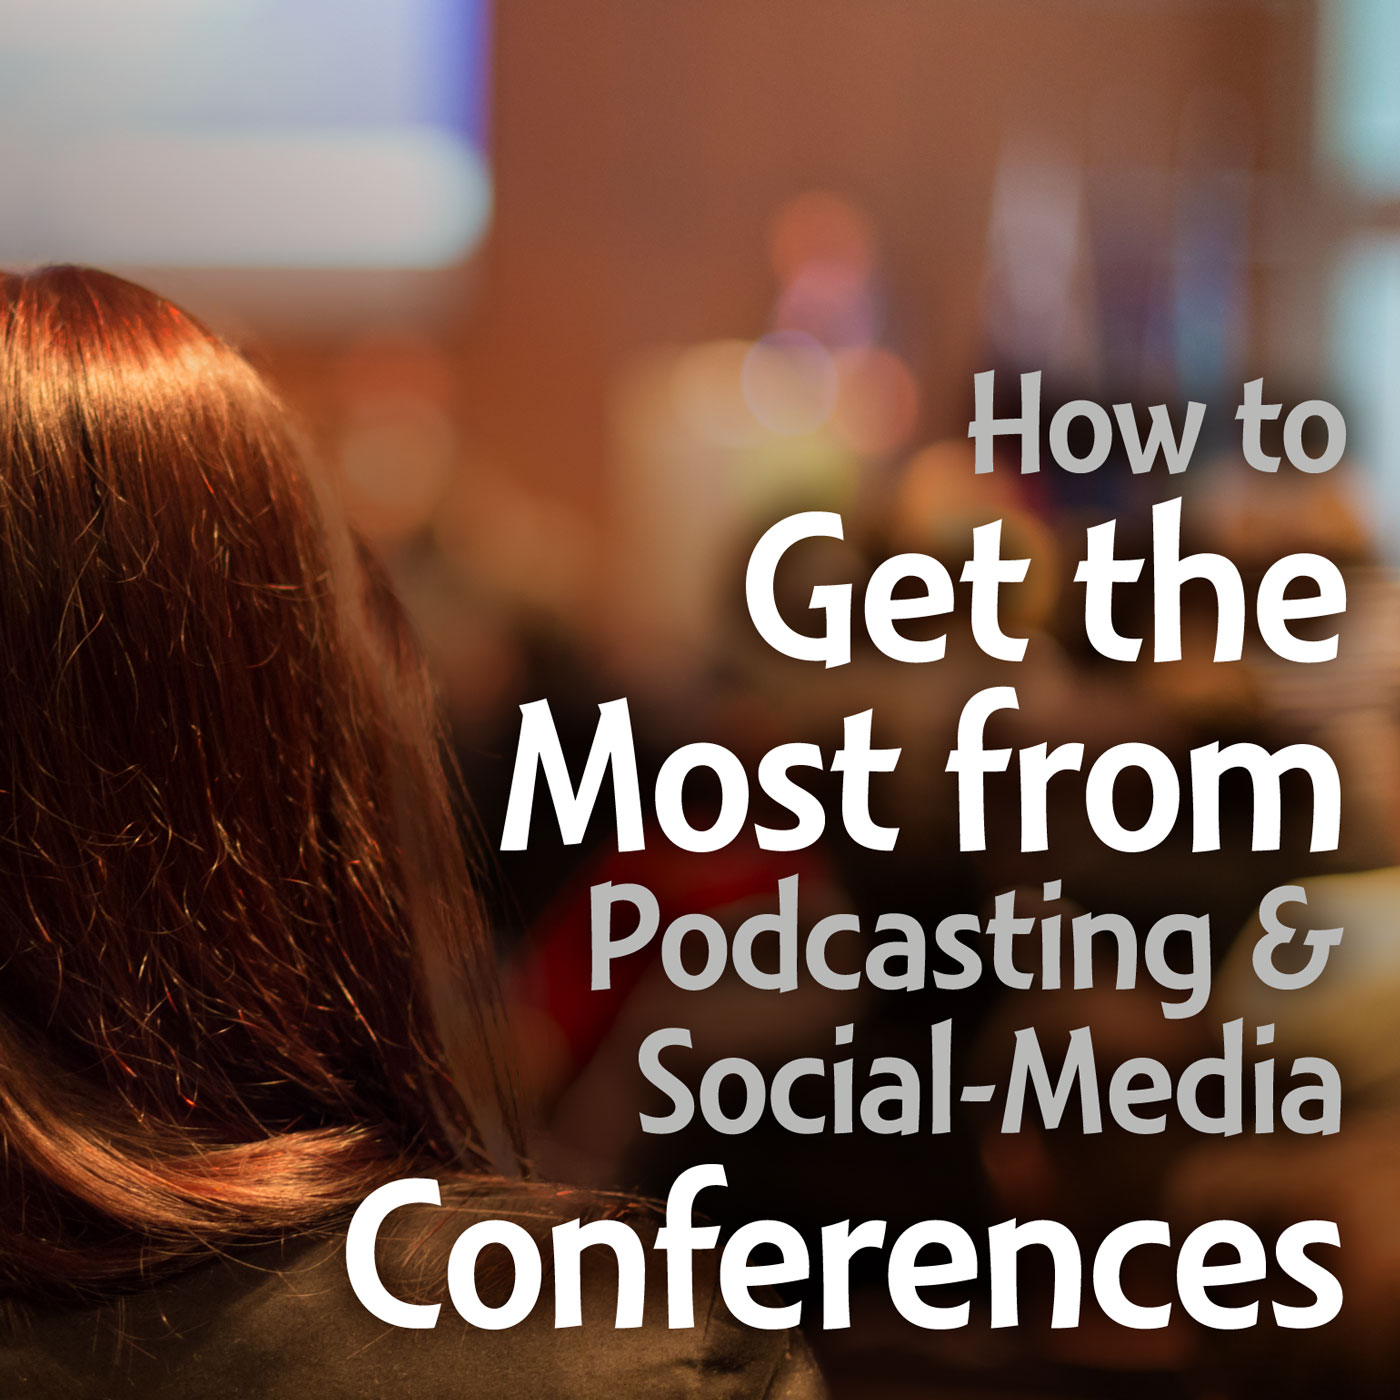 How to Get the Most from Podcasting and Social-Media Conferences